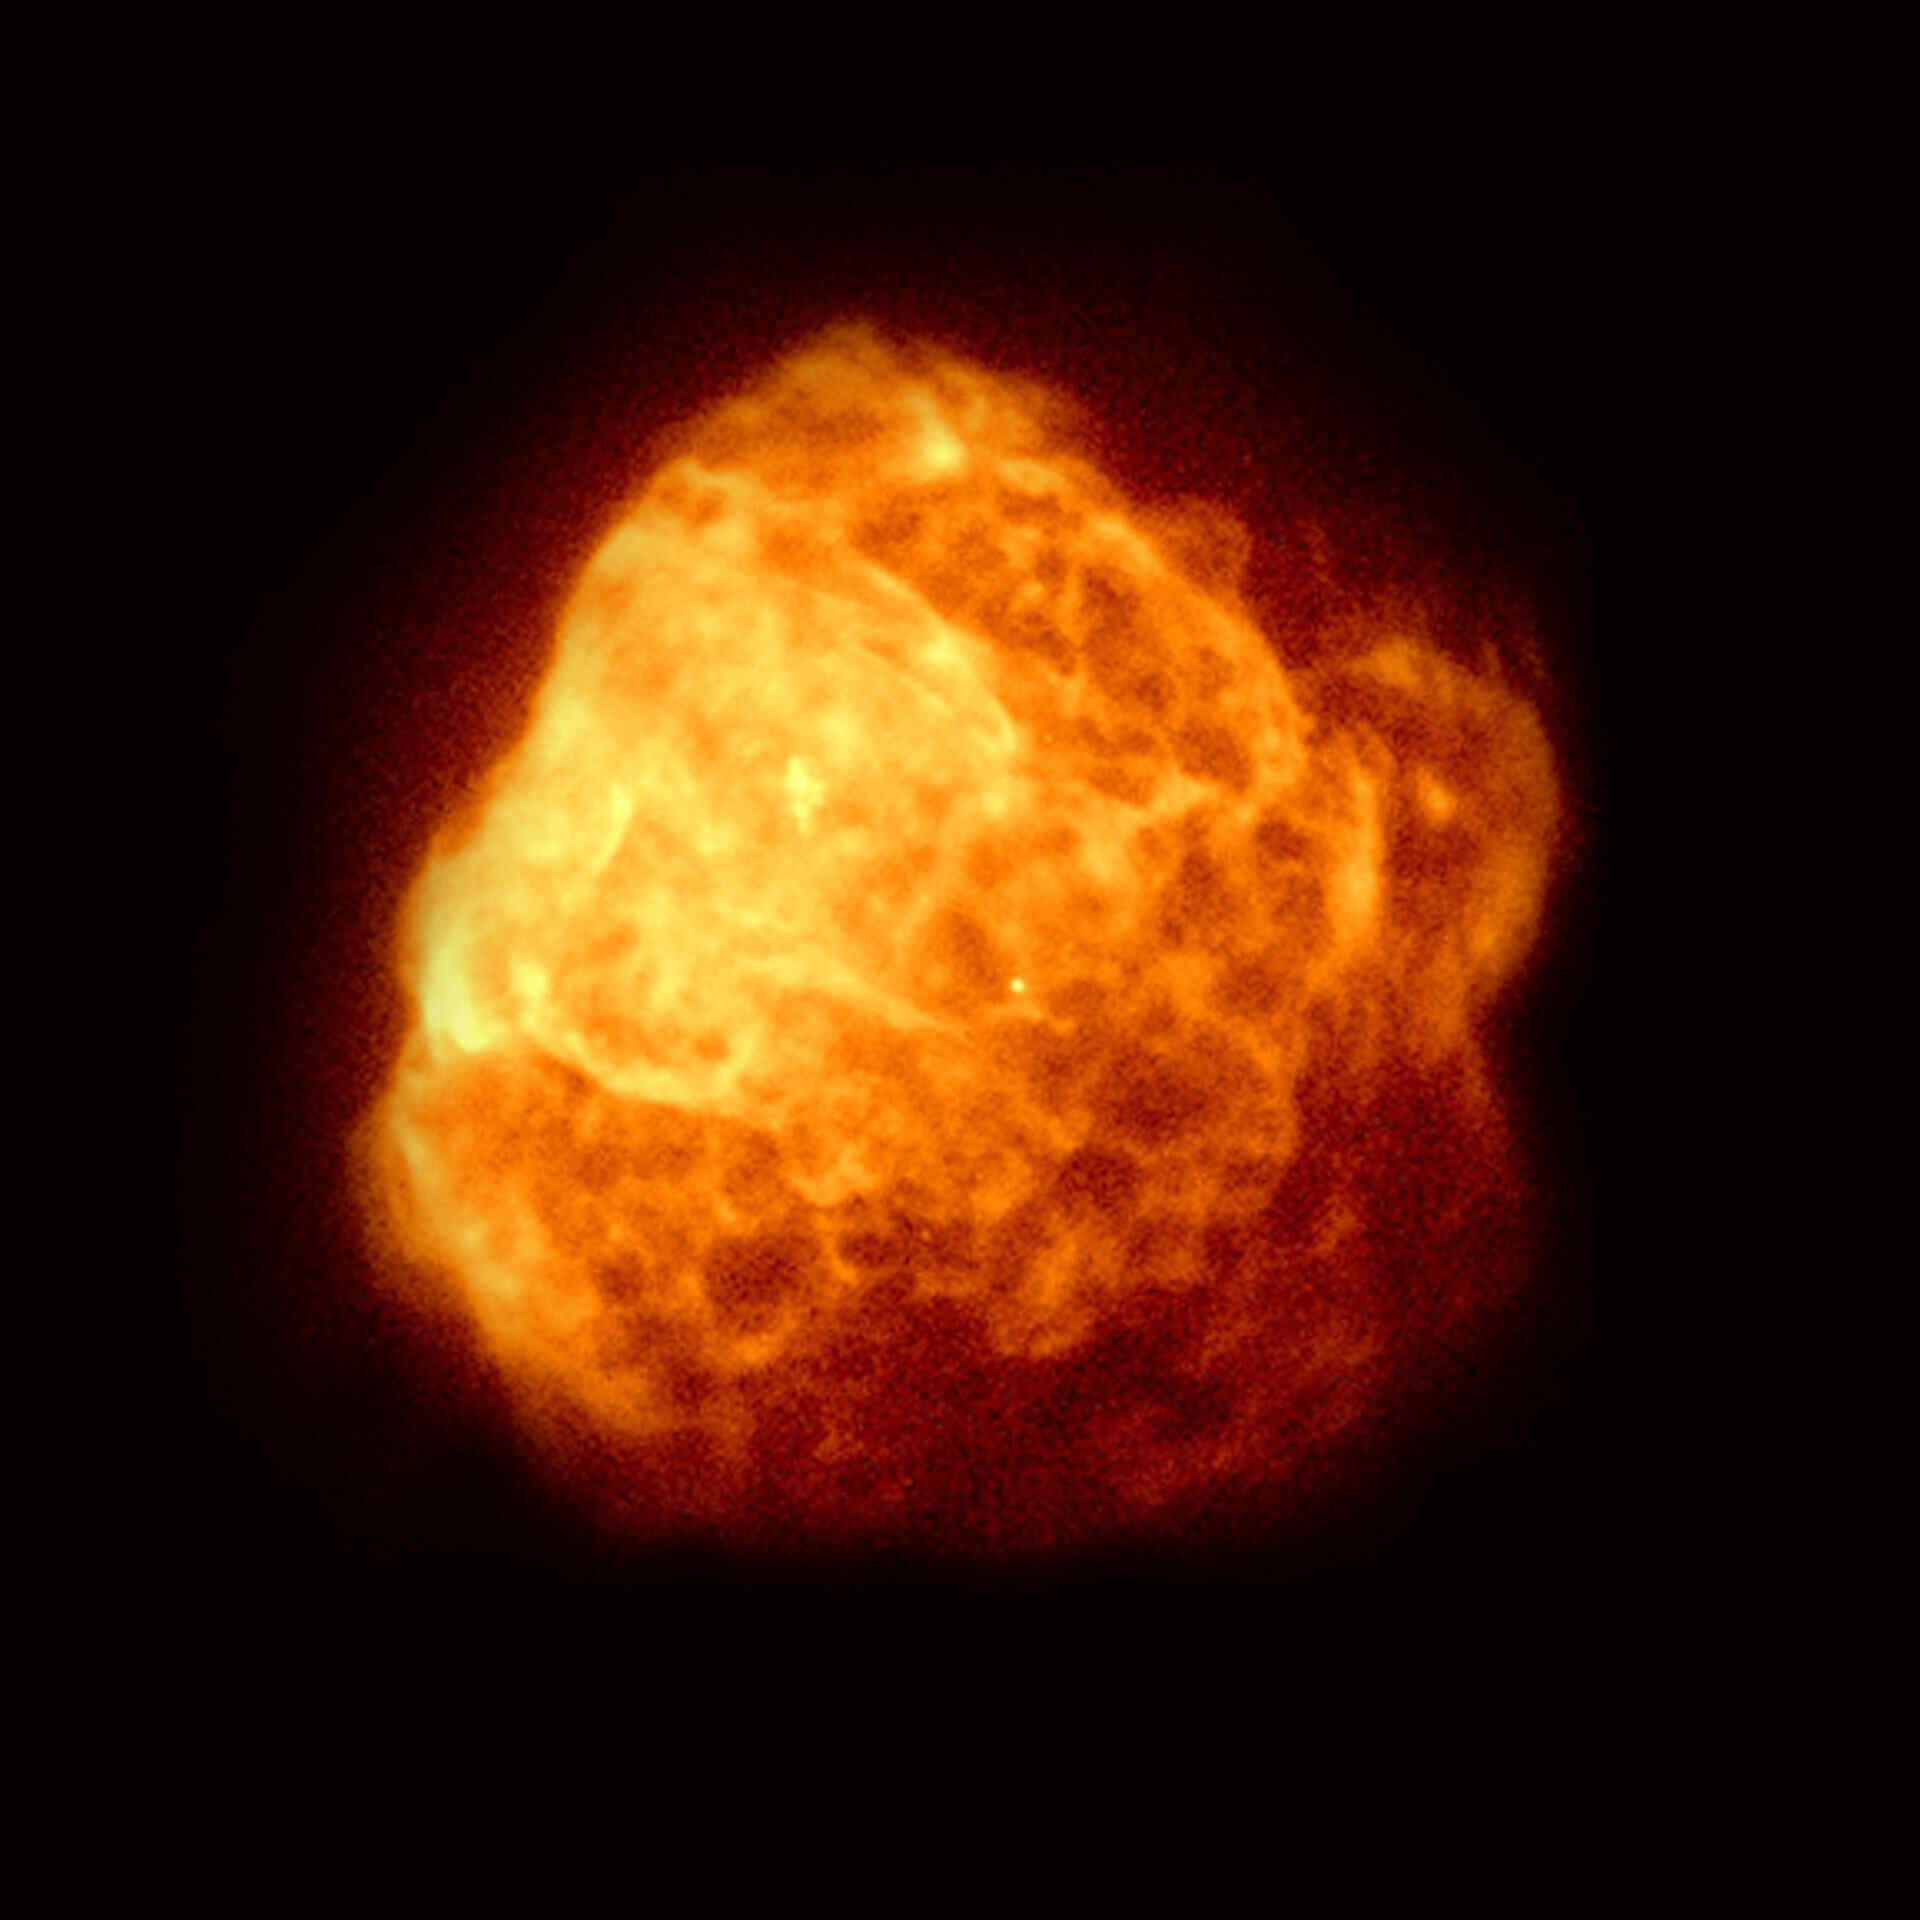 The Einstein Probe captured the supernova remnant Puppis A in X-ray light as part of the first light images